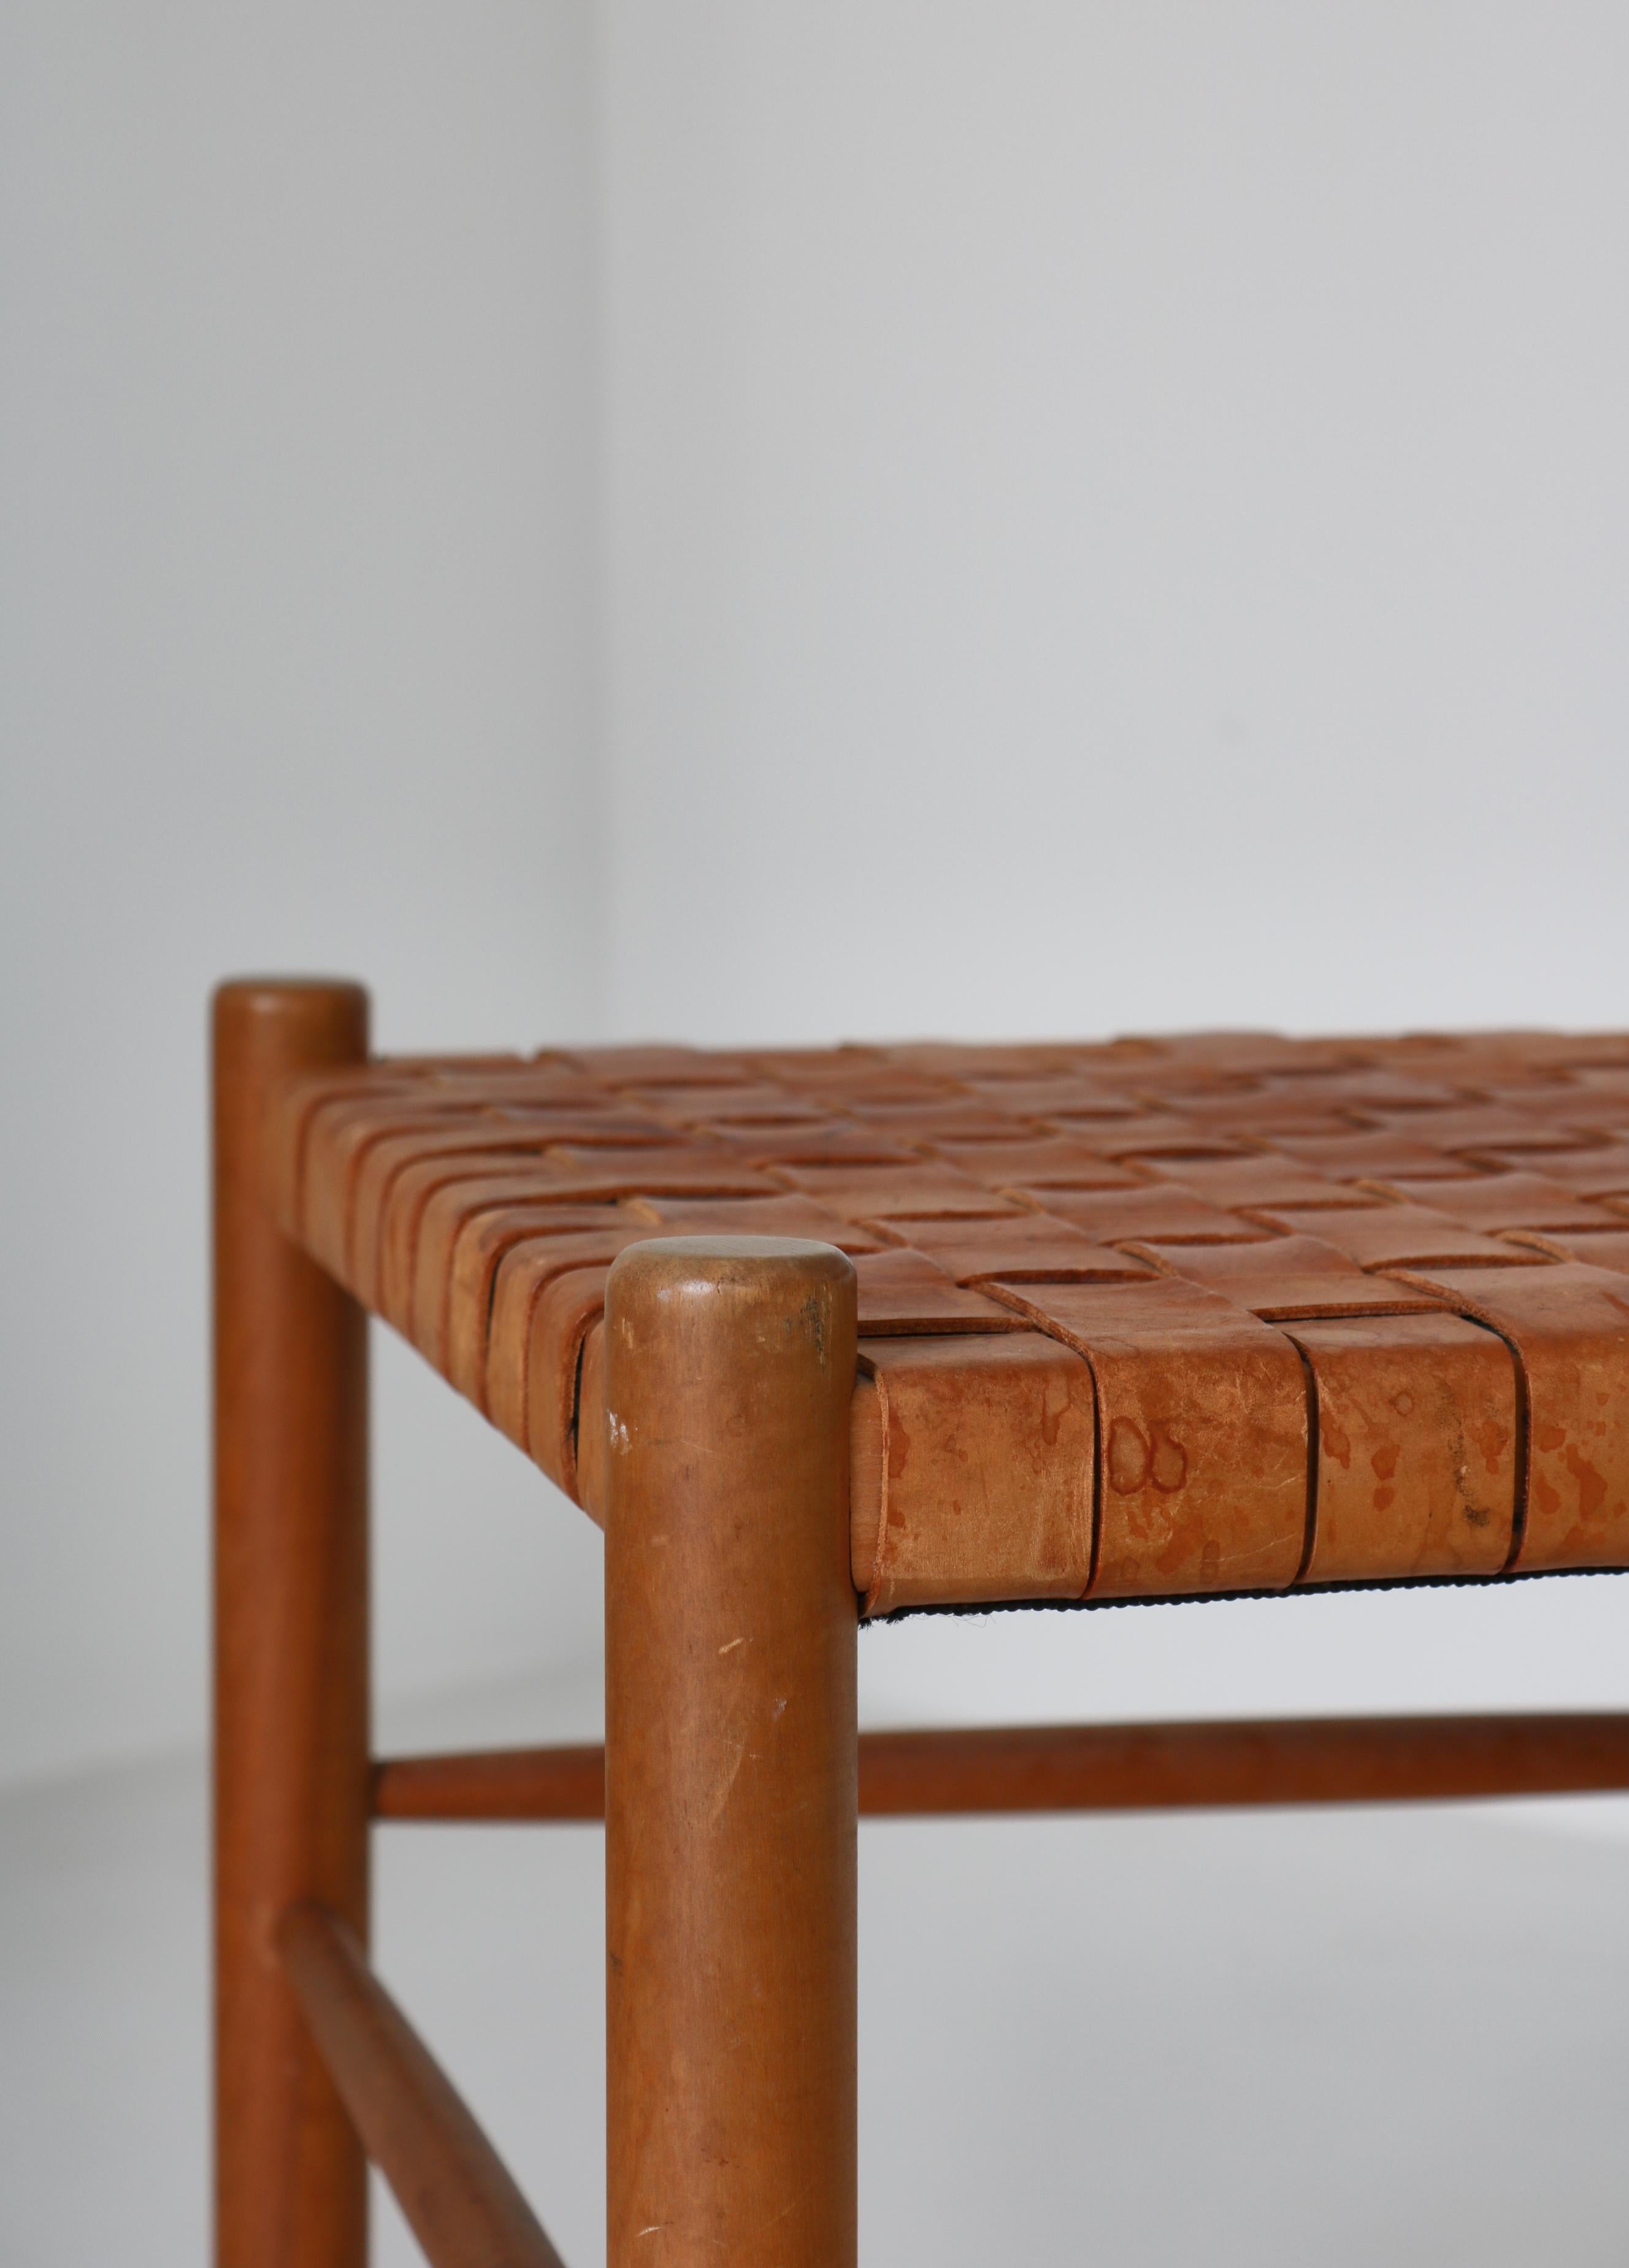 Mid-20th Century Vintage Scandinavian Shaker Chair in Beech and Leather Seat, Denmark, 1960s For Sale